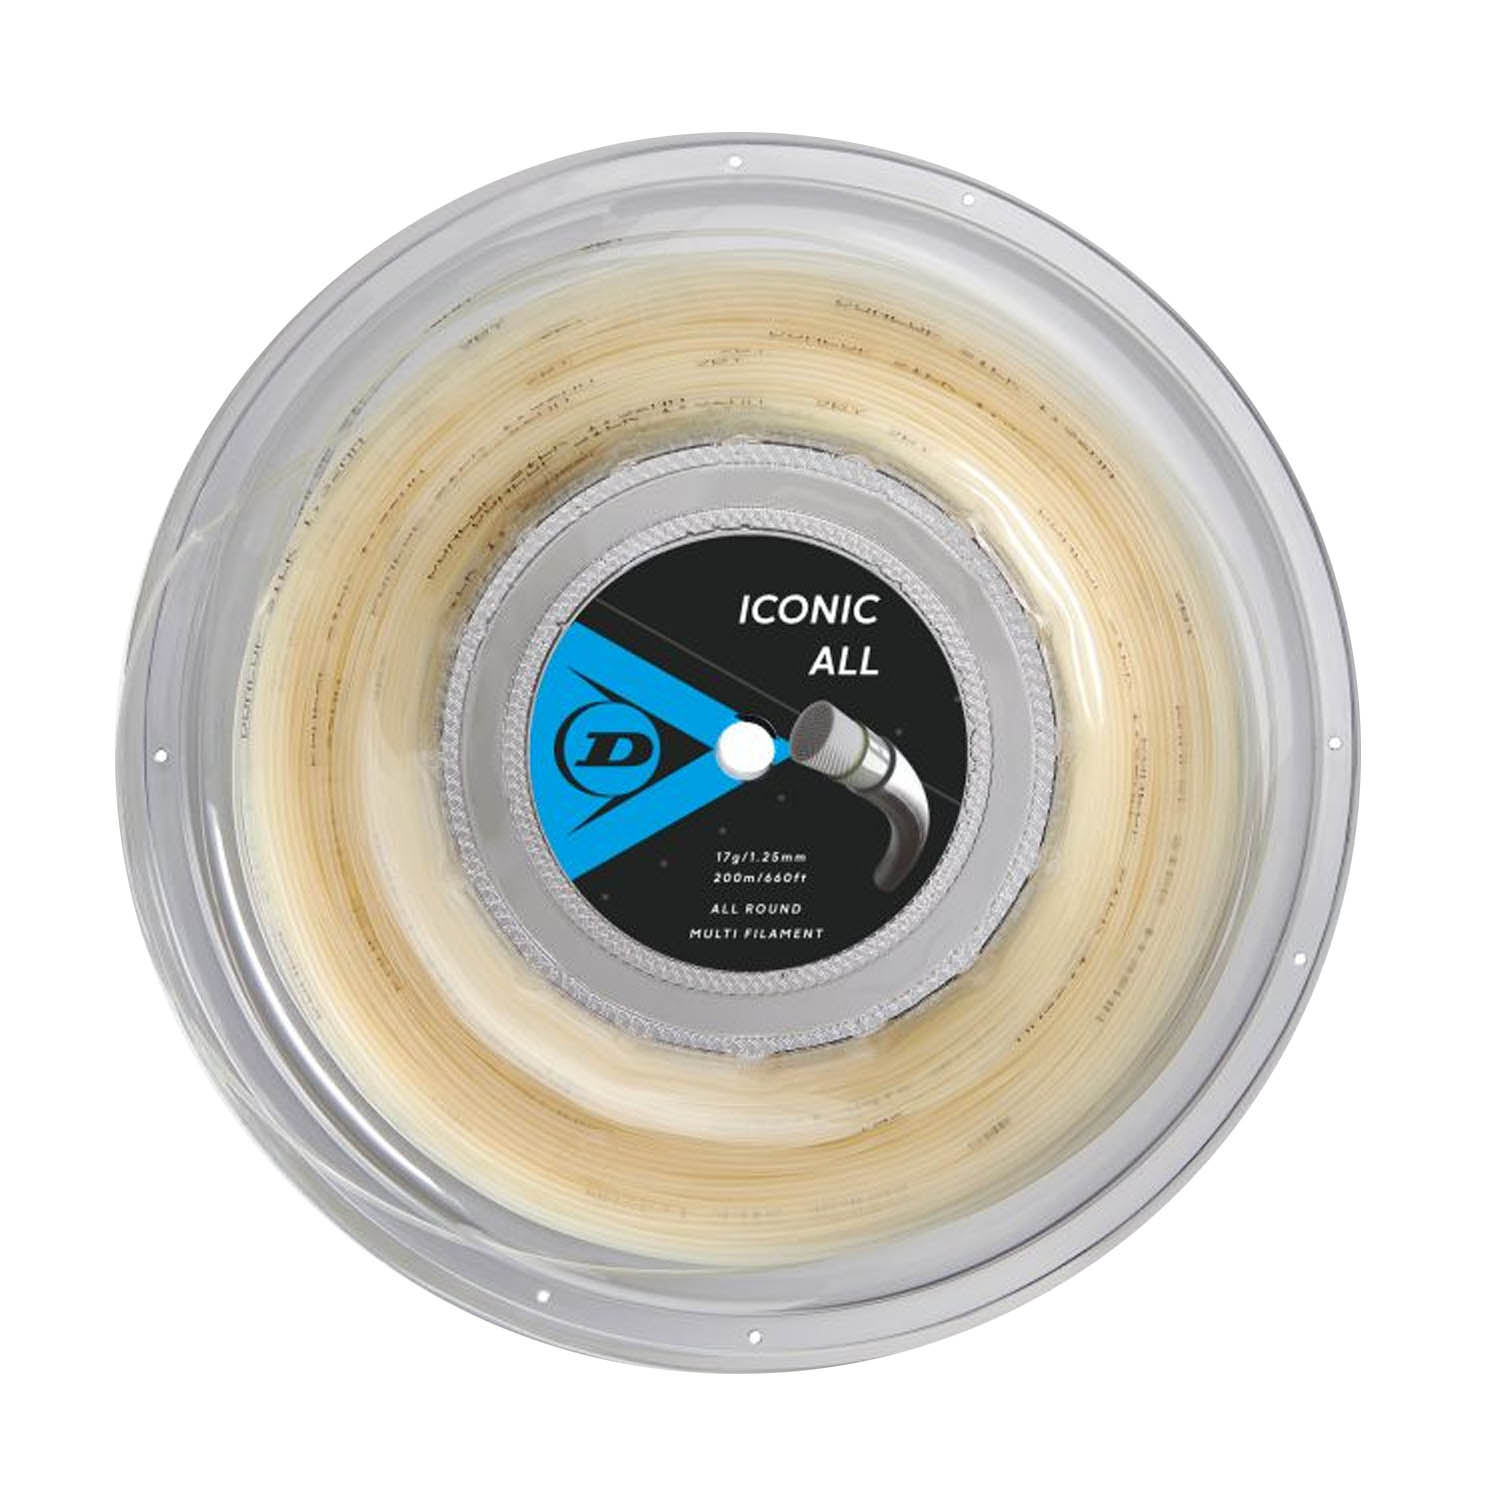 Dunlop Iconic All 1.25 200 m String Reel - Natural